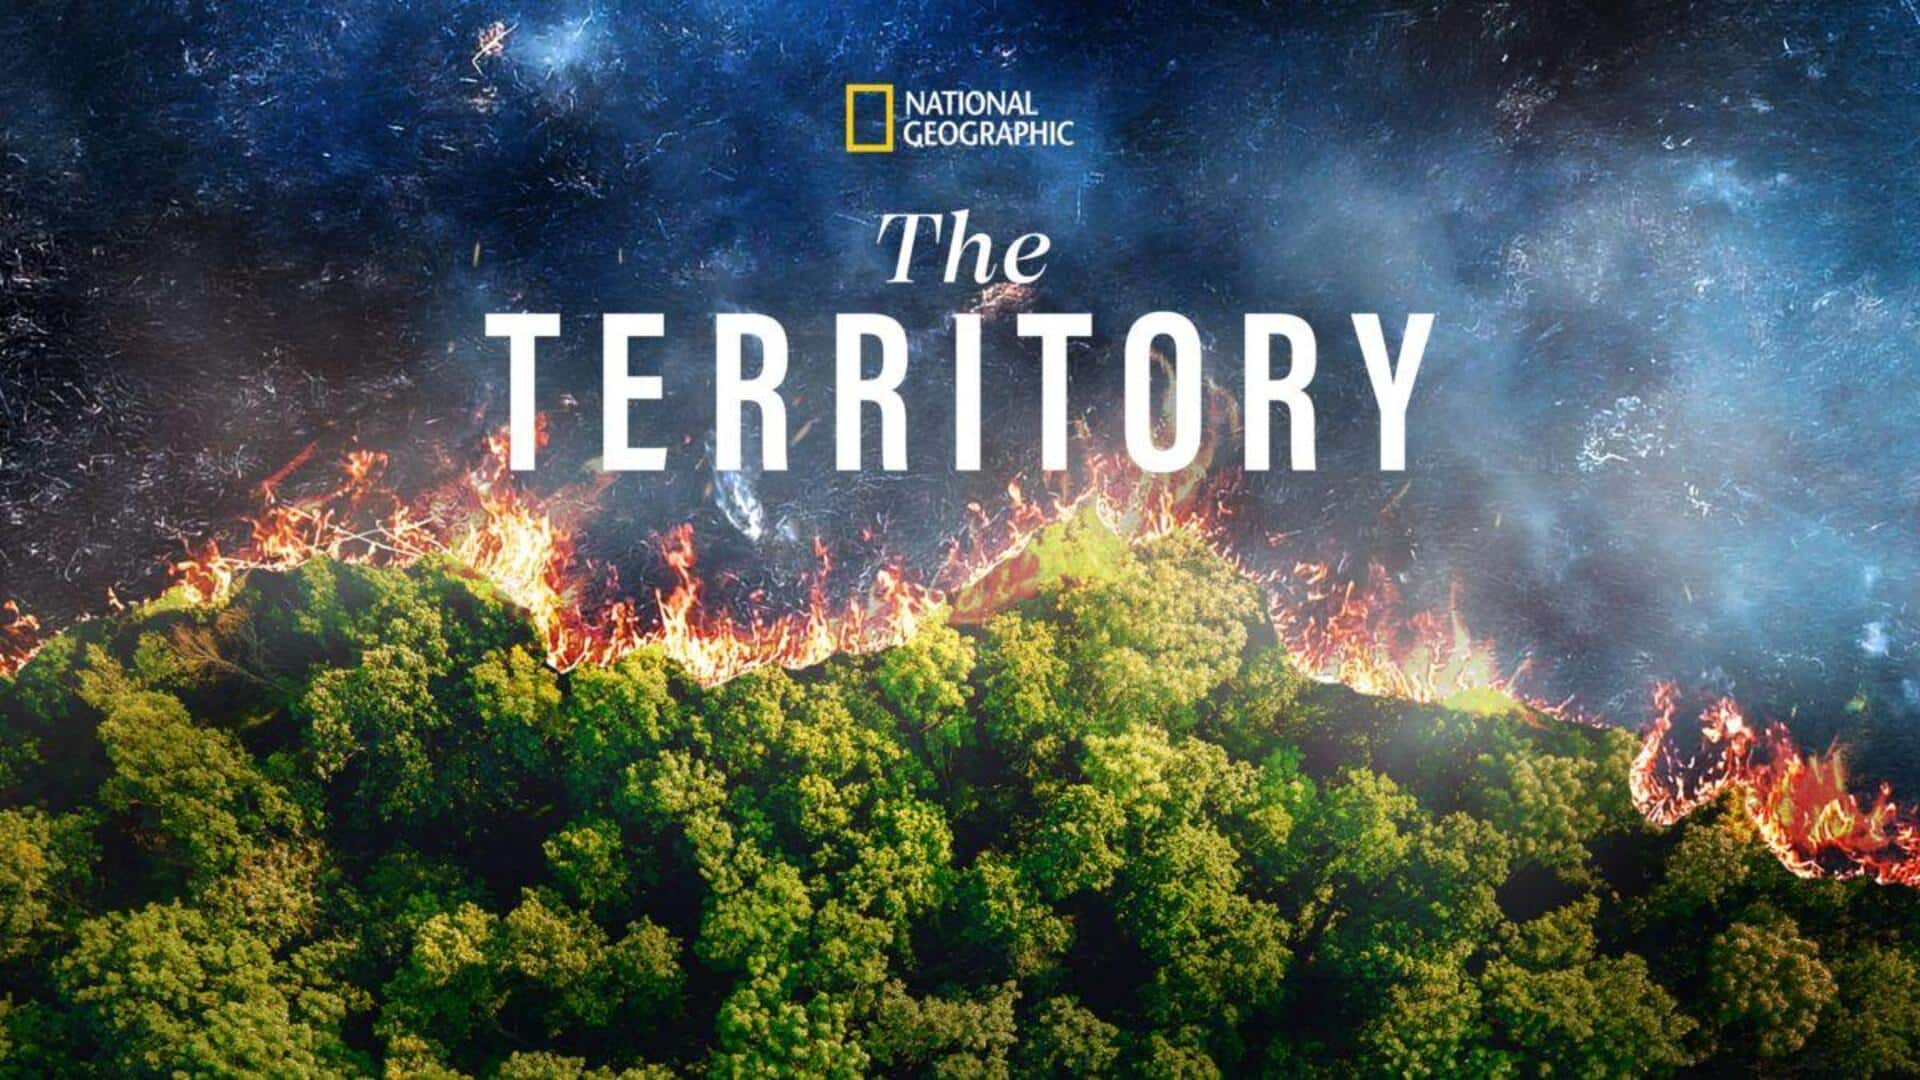 Know about Emmy-winning documentary NatGeo's 'The Territory' 